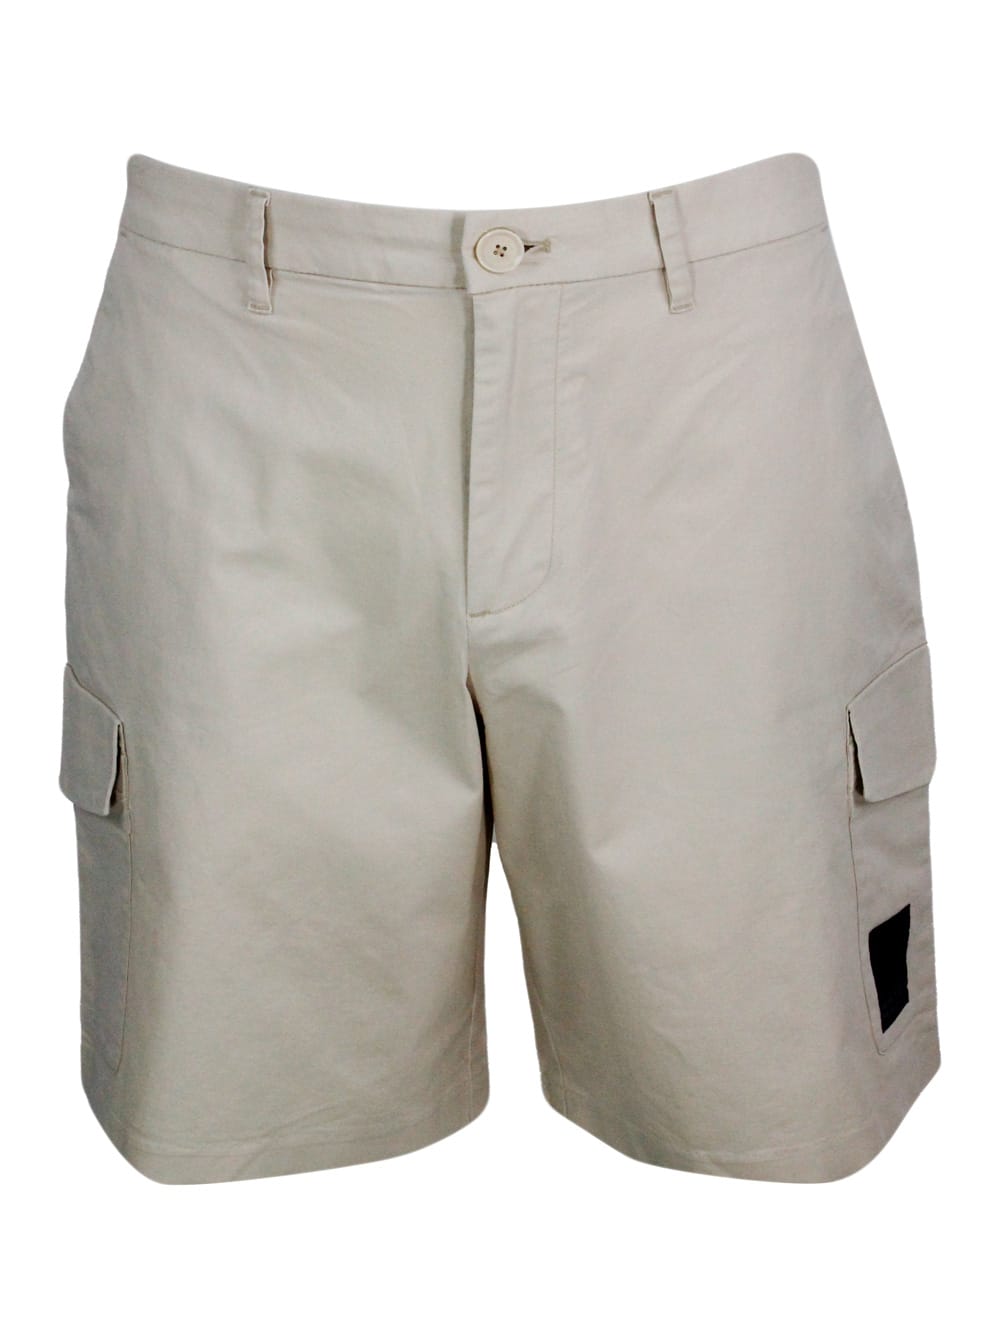 Stretch Cotton Bermuda Shorts, Cargo Model With Large Pockets On The Leg And Zip And Button Closure